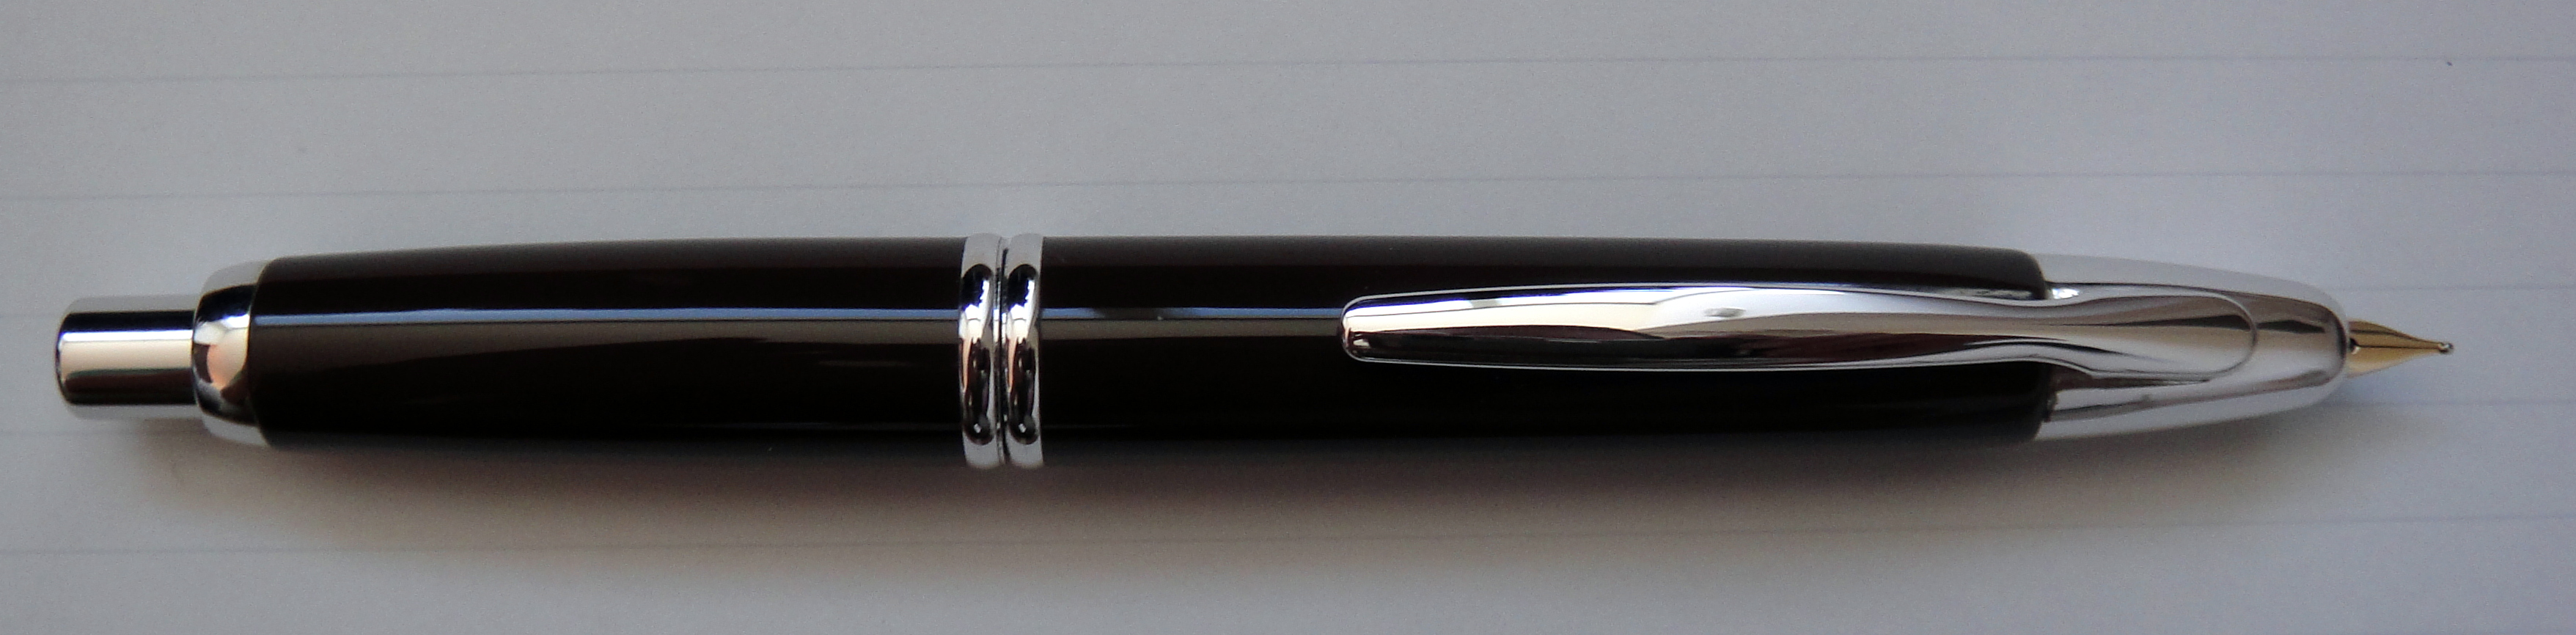 Current style Pilot Vanishing Pont with nib extended